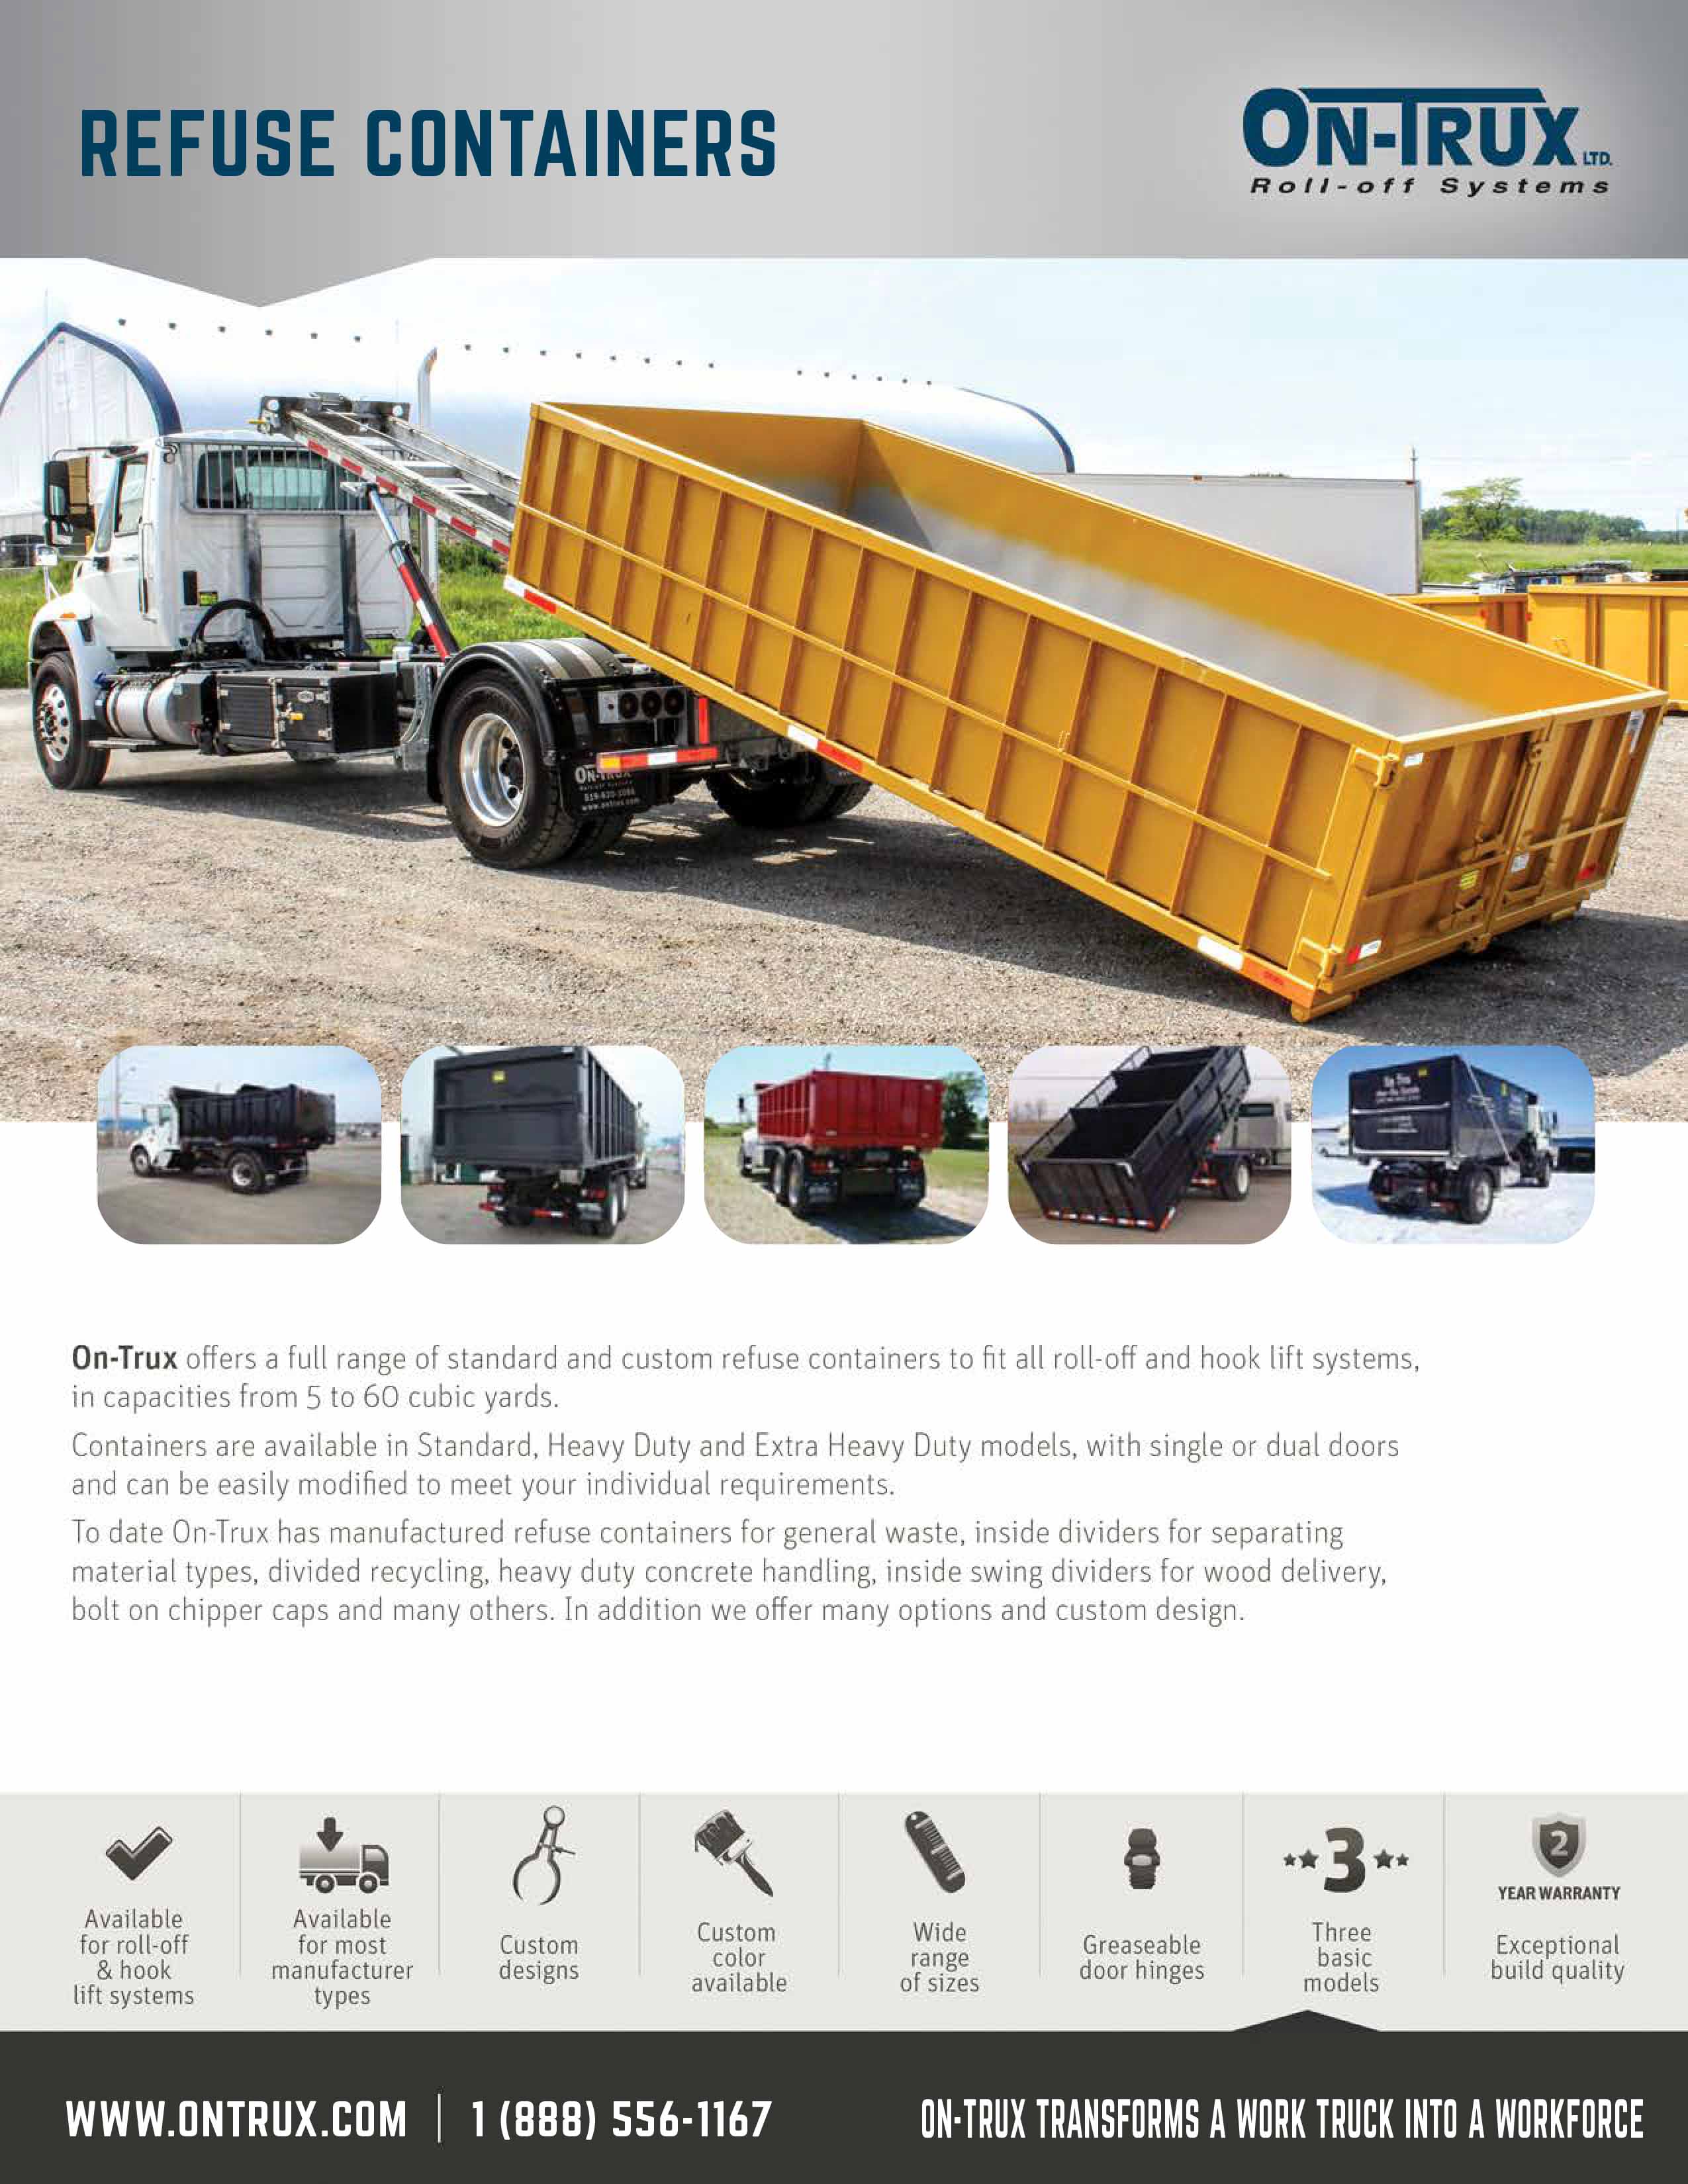 REFUSE CONTAINERS: Available for most roll-off and hook-lift systems